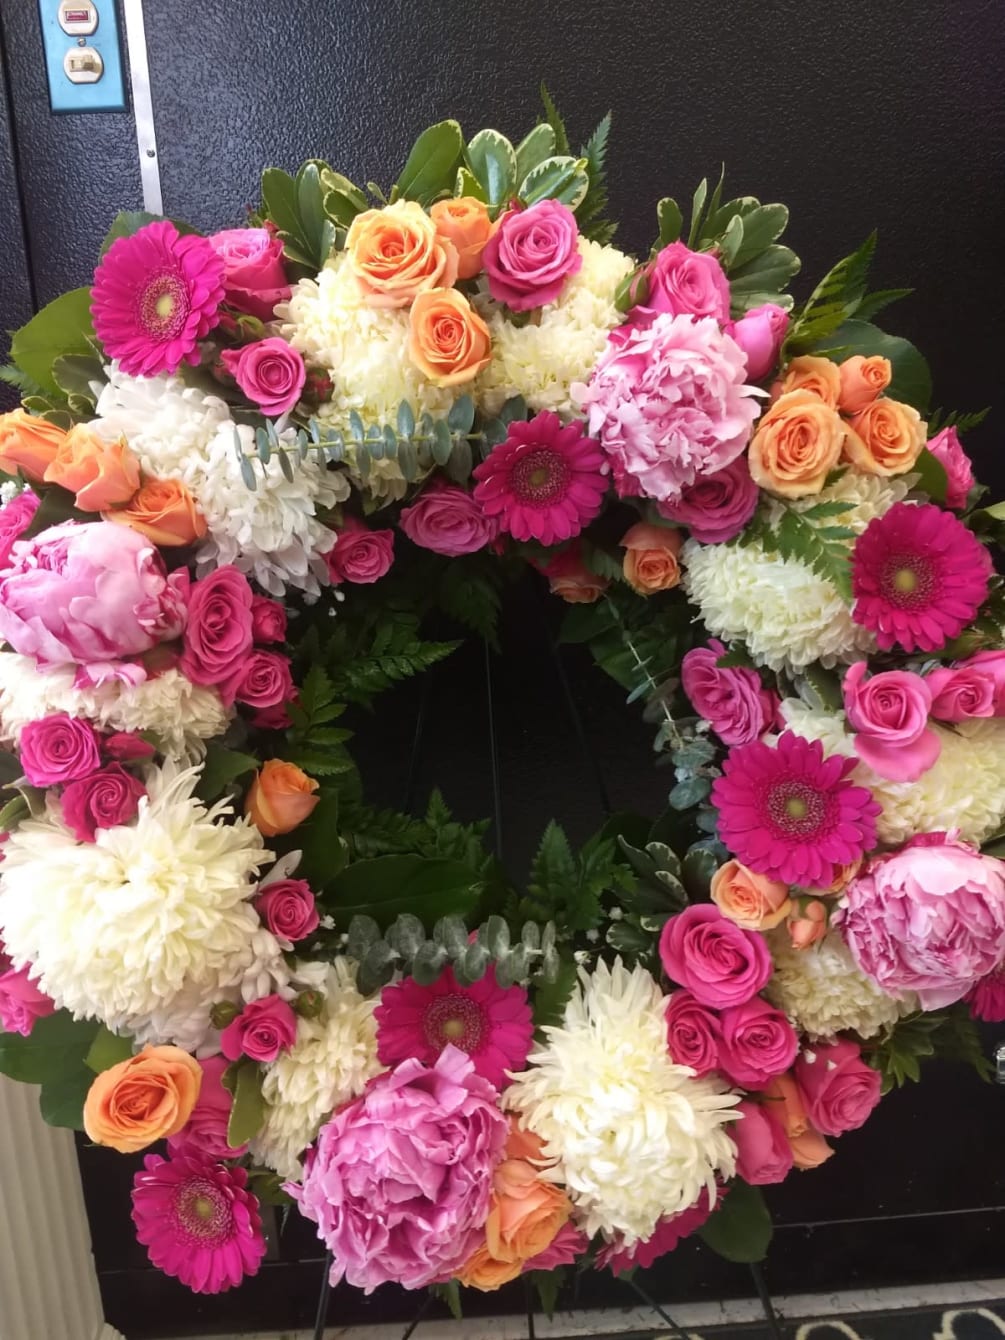 Honor with a beautiful wreath composed of our bright mix florals including